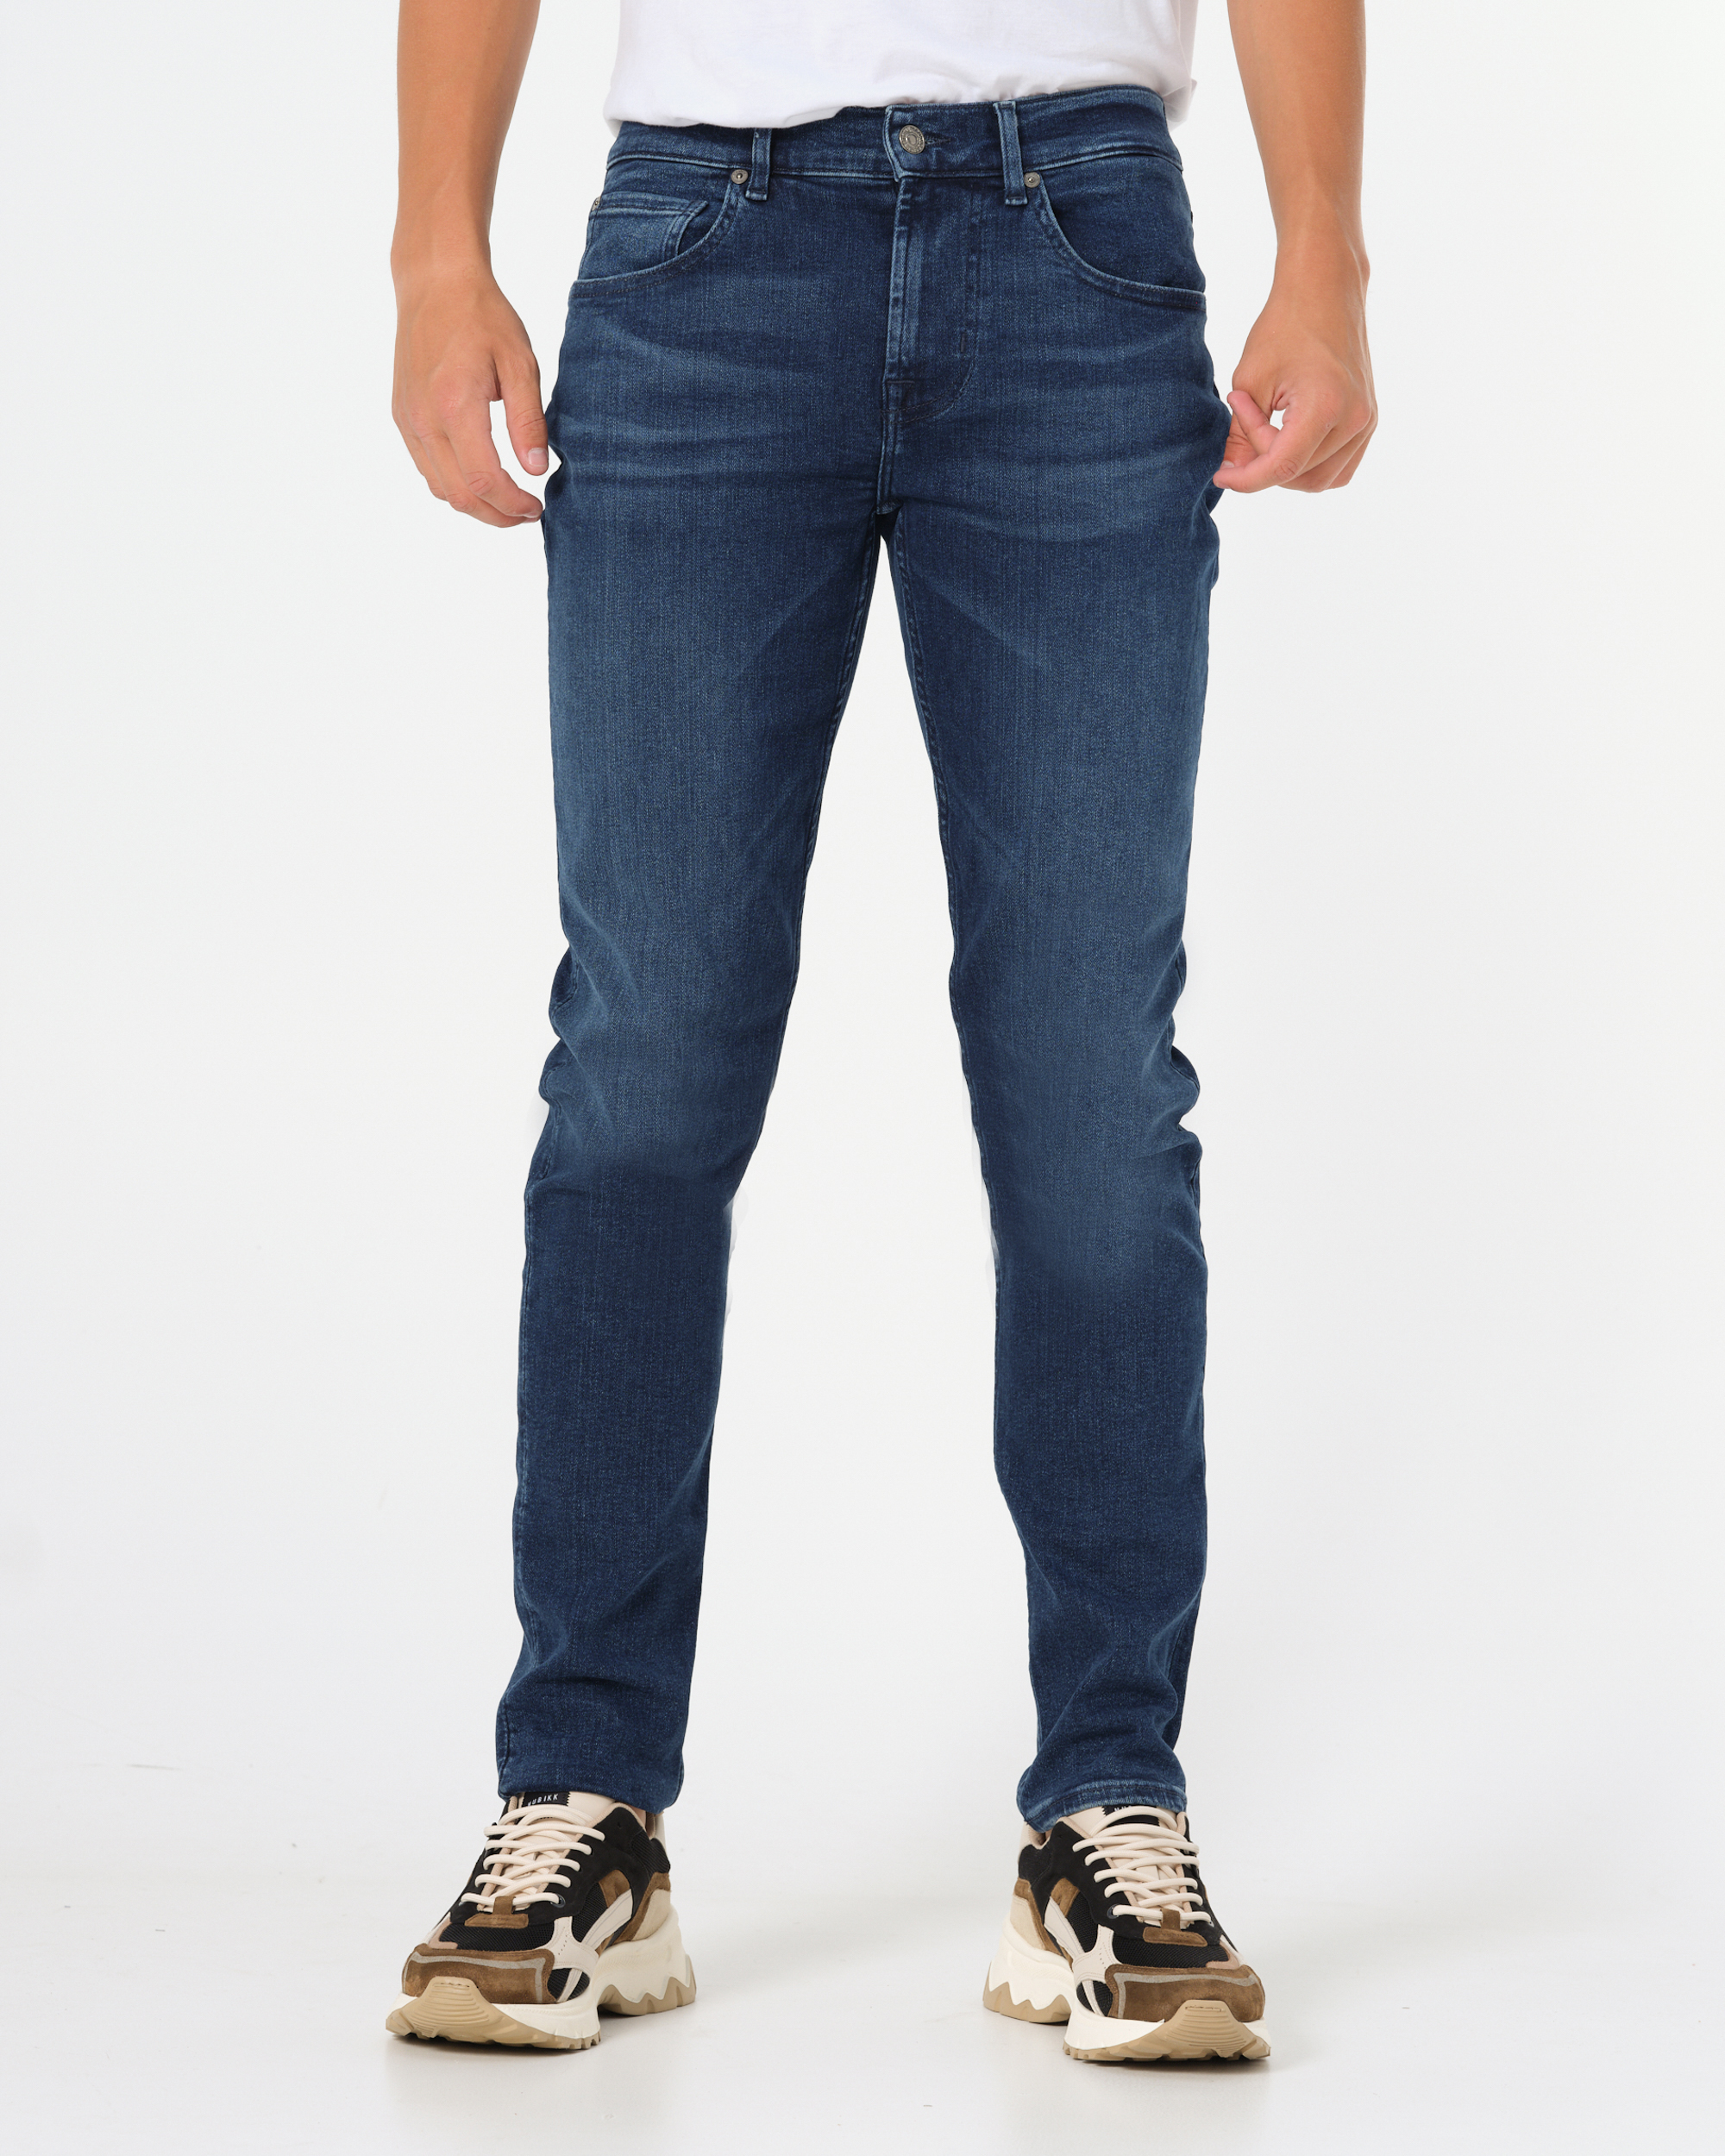 Afbeelding van 7 For All Mankind Rebus jeans